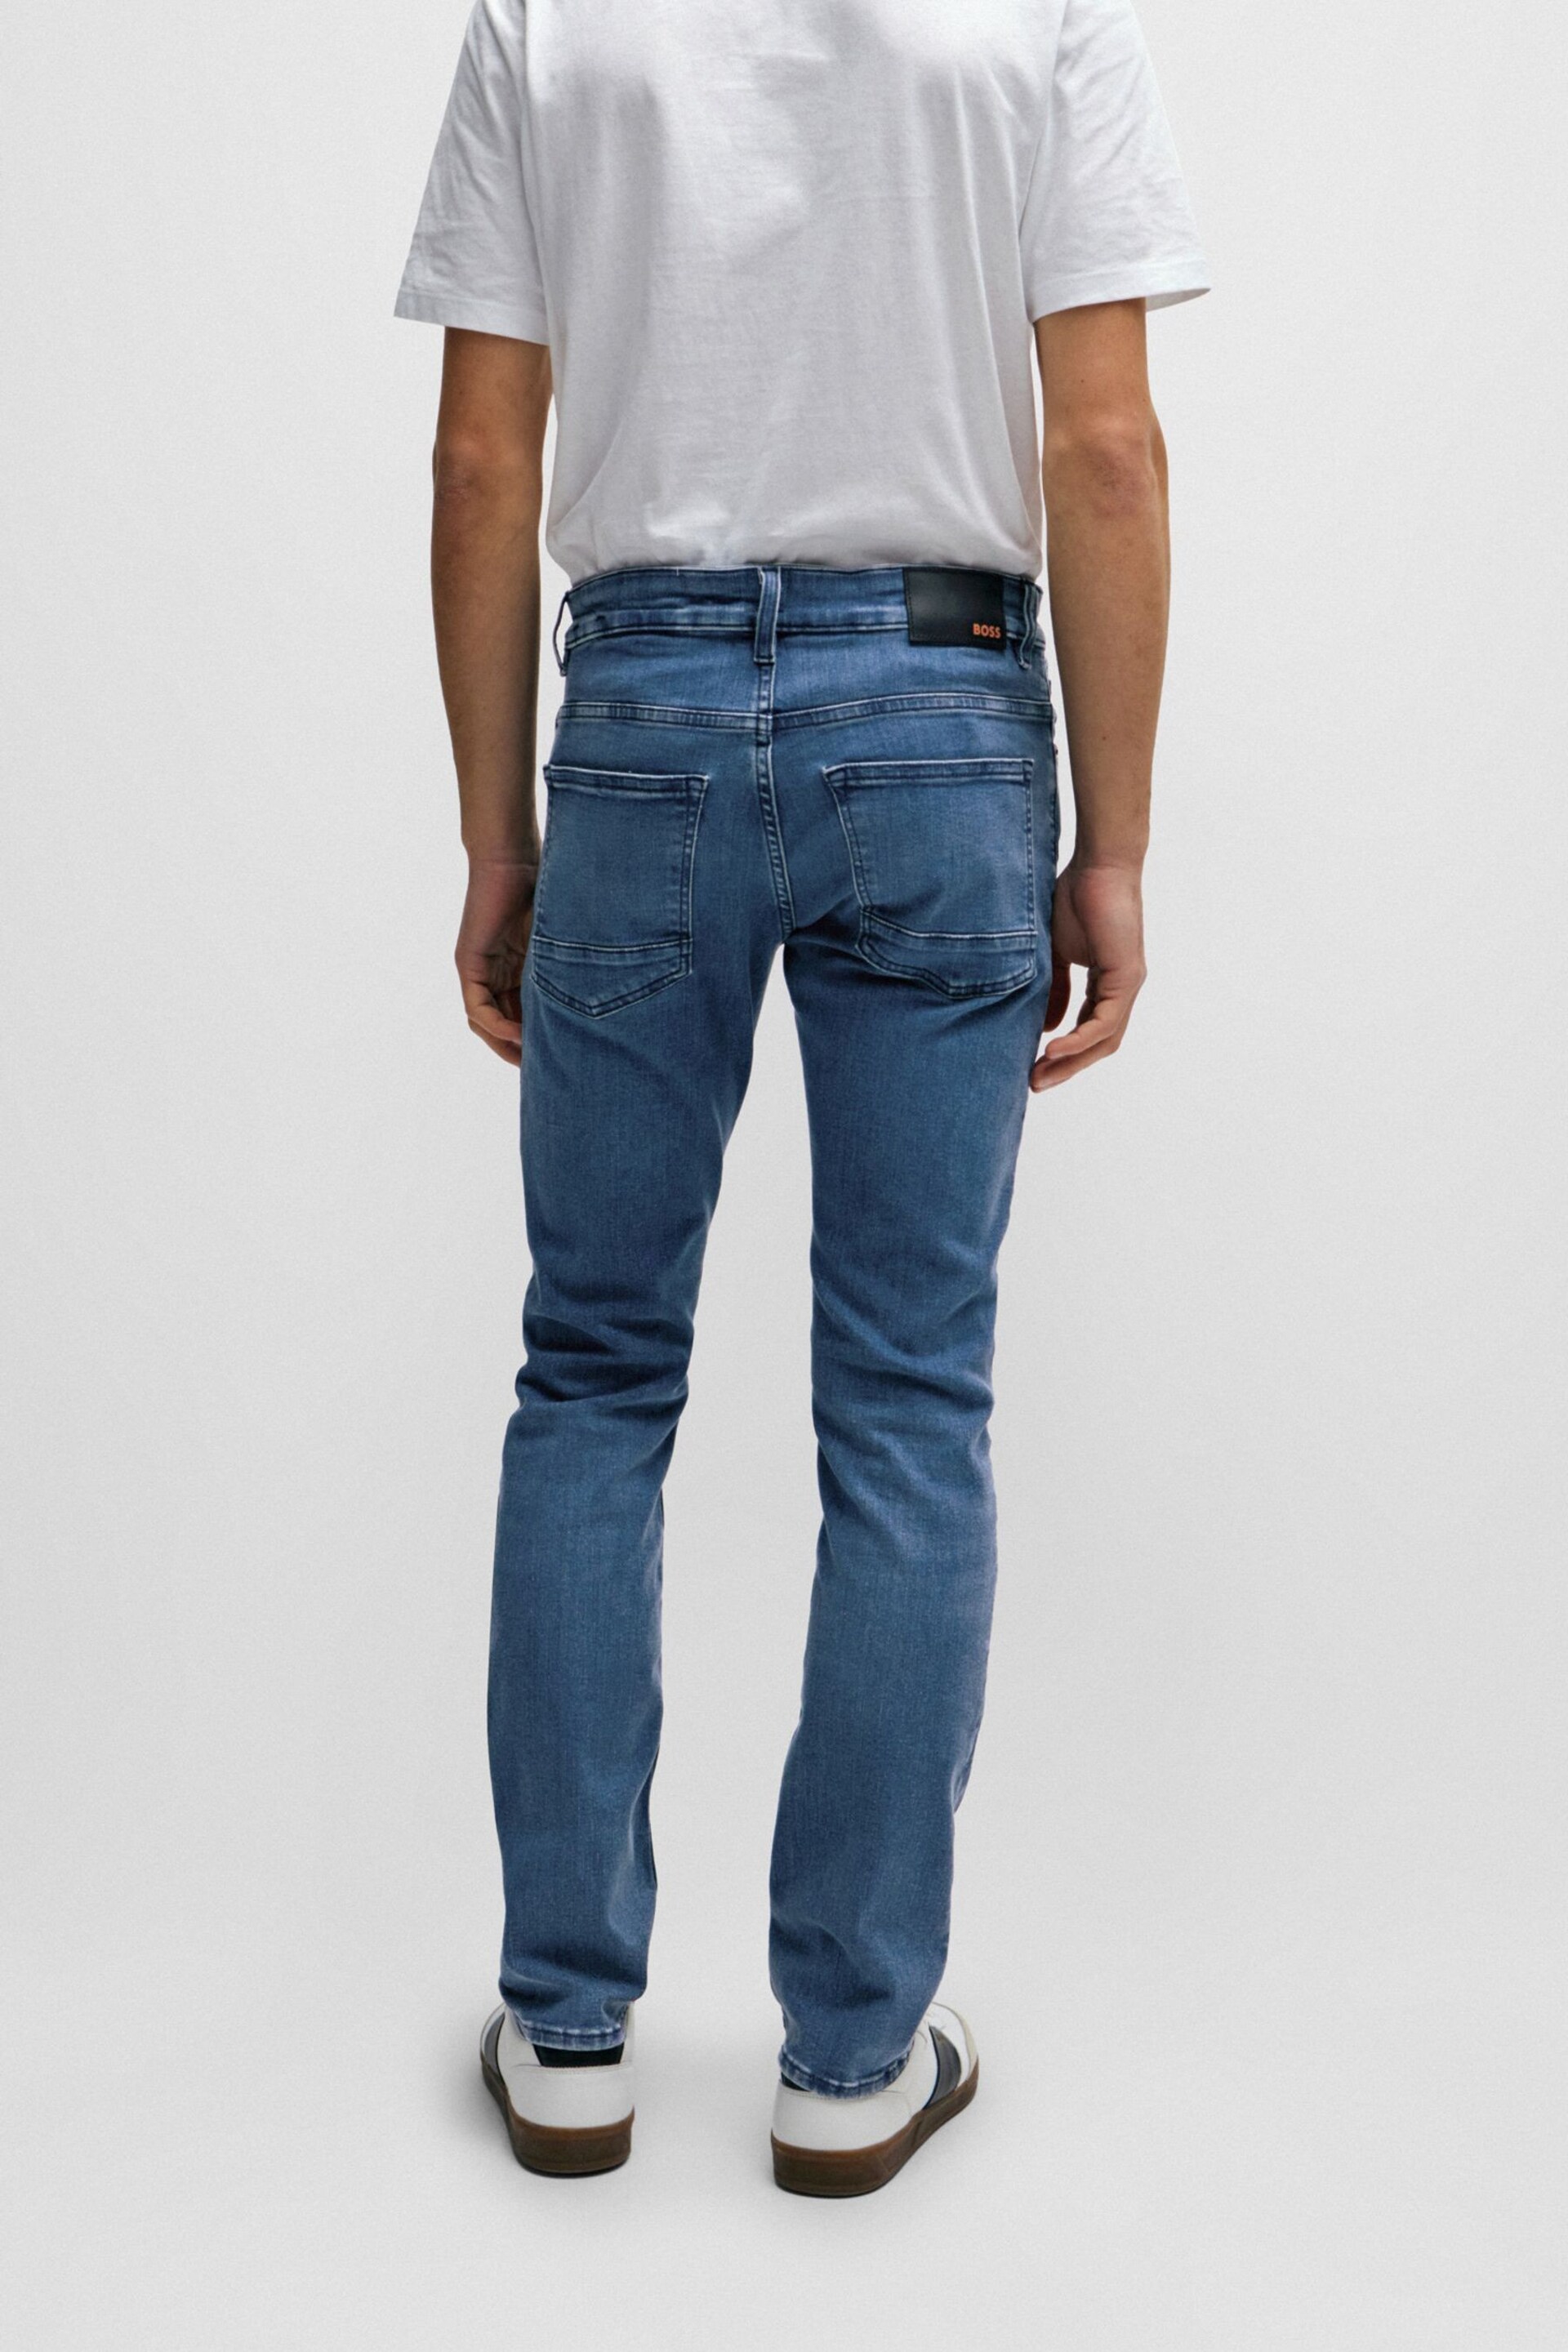 BOSS Mid Blue Tapered Fit Super Stretch Denim Jeans - Image 2 of 5